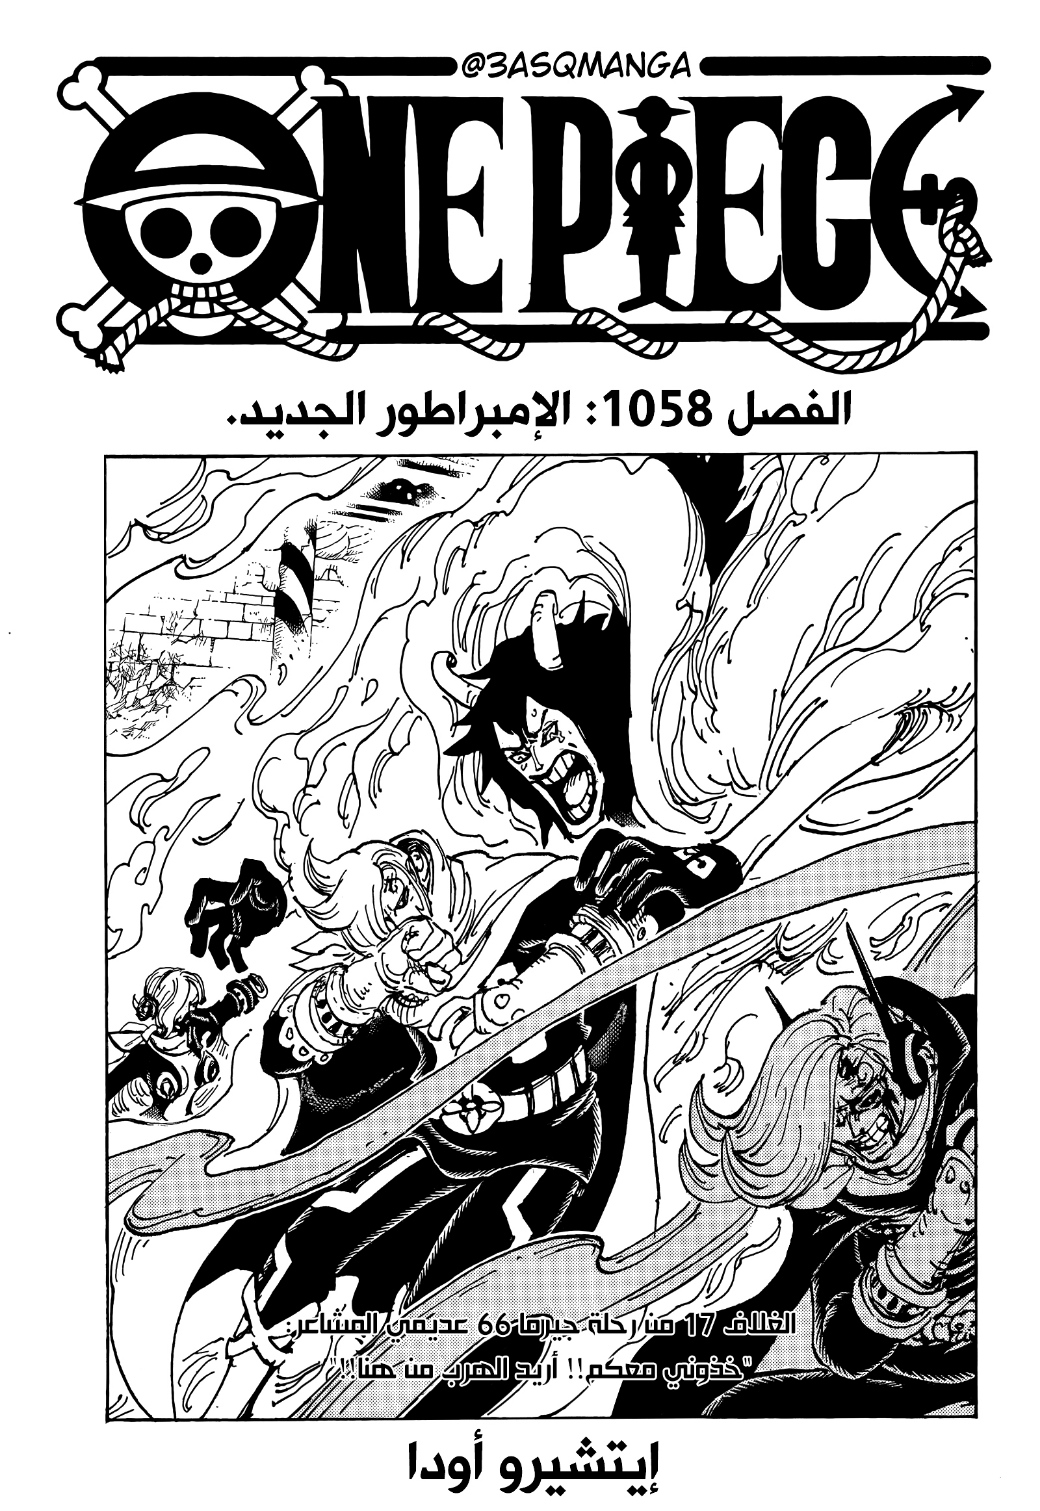 One Piece: Chapter 1058 - Page 1